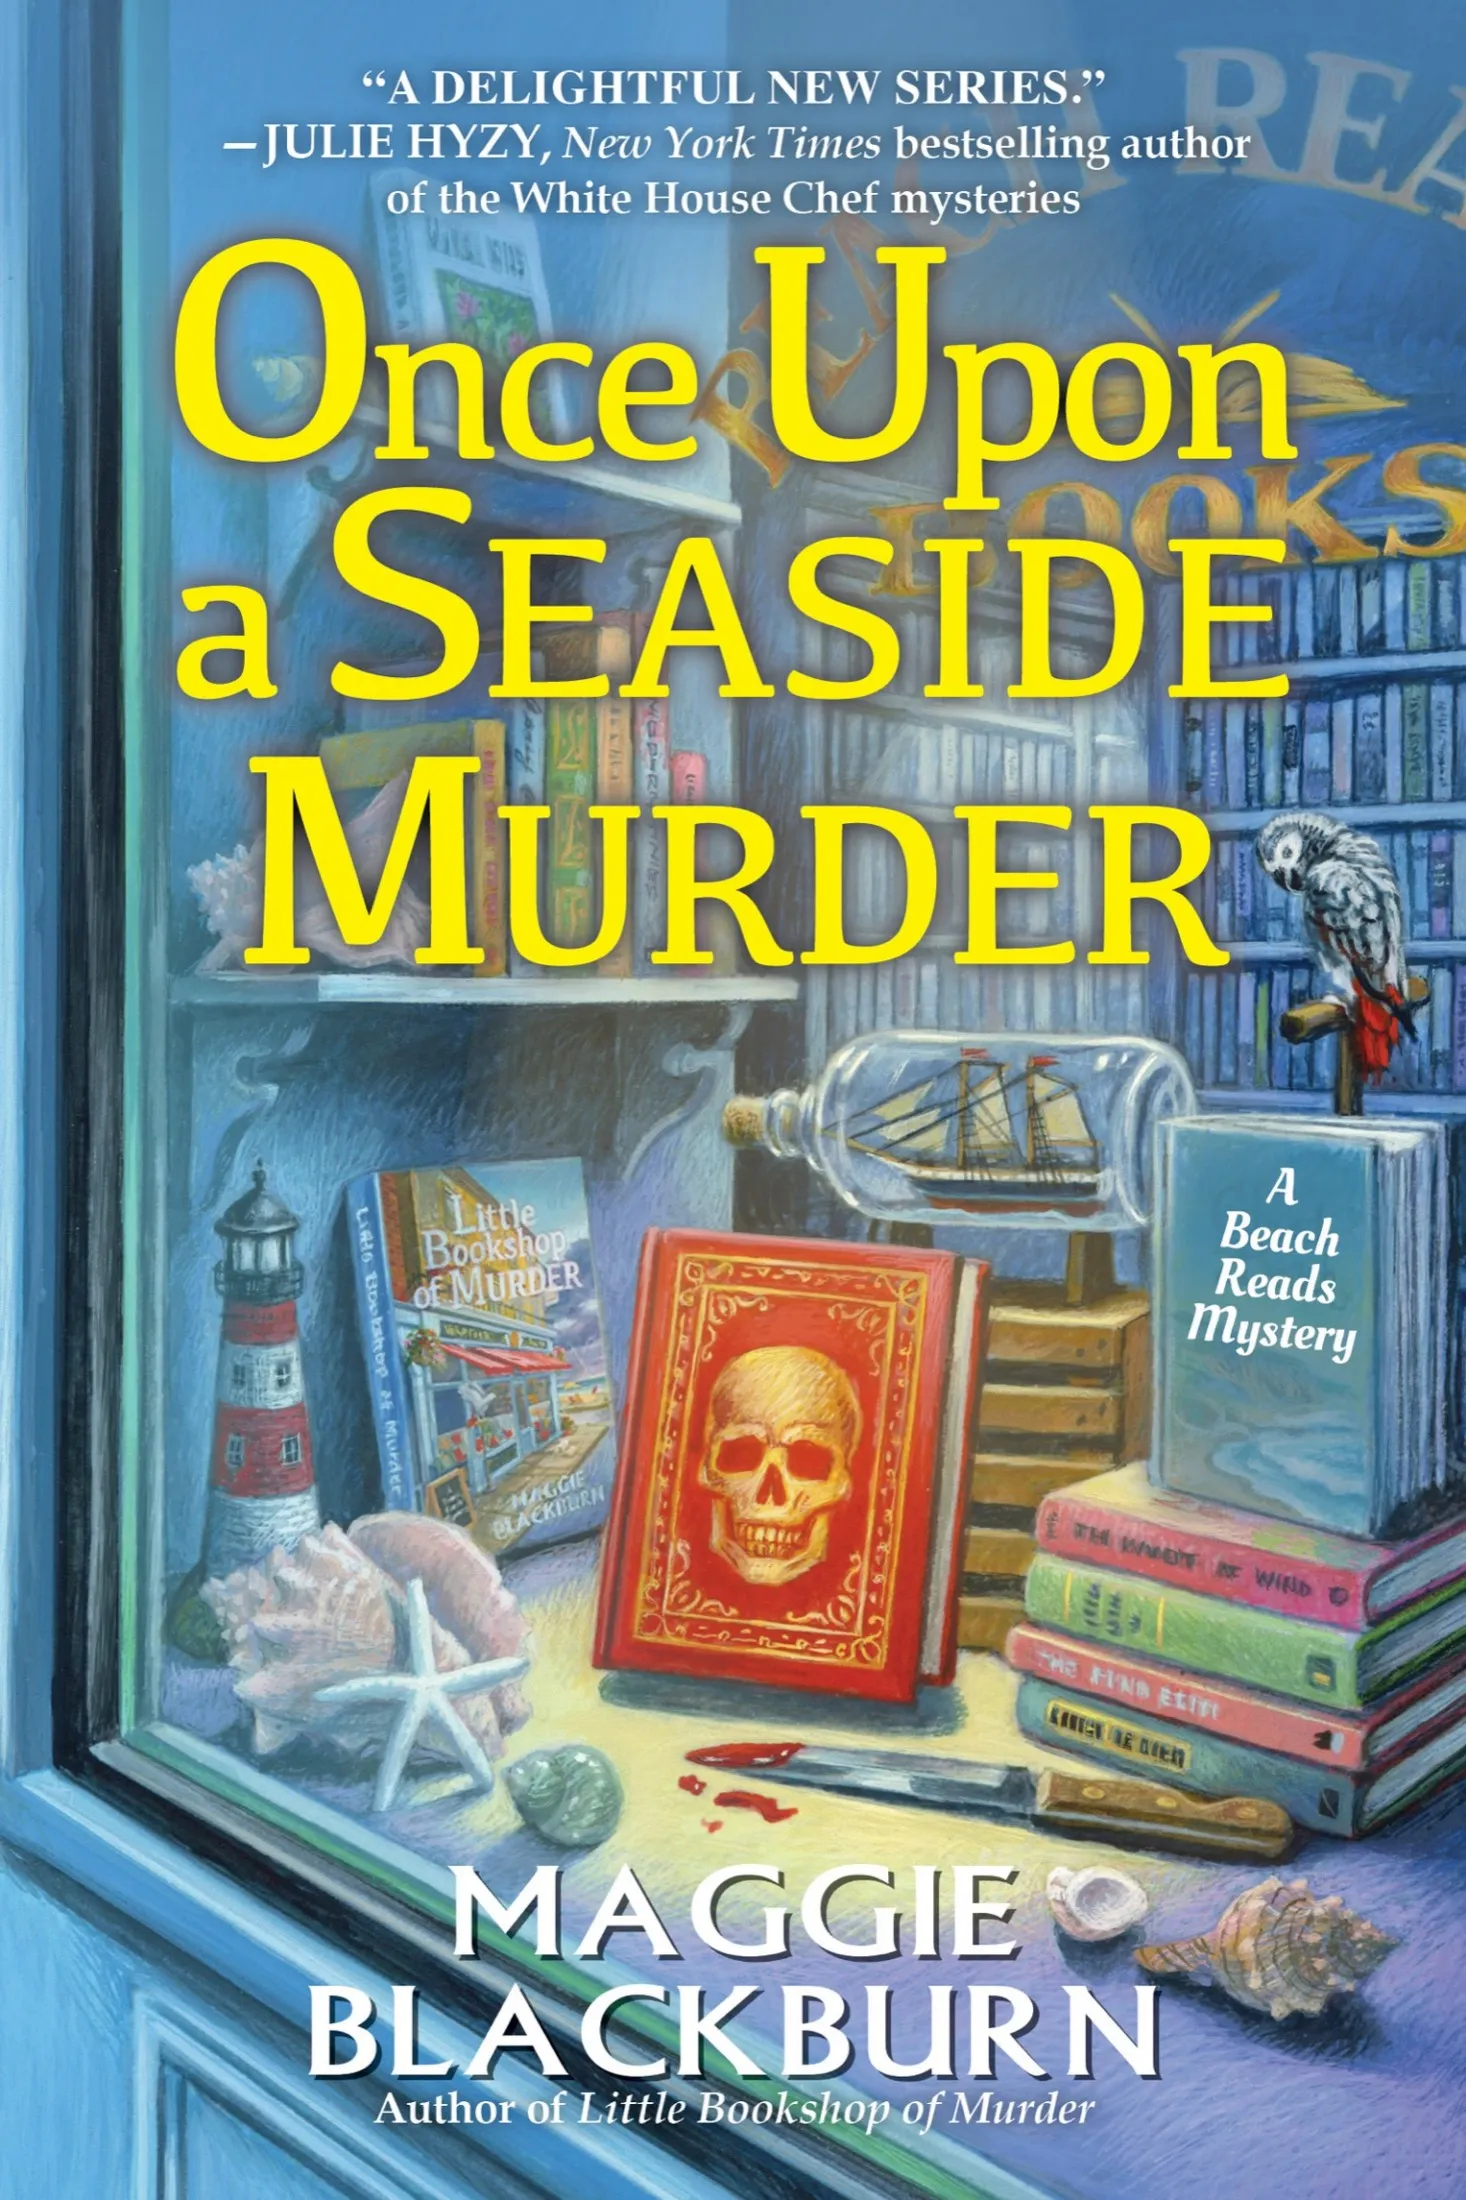 Once Upon a Seaside Murder (A Beach Reads Mystery #2)